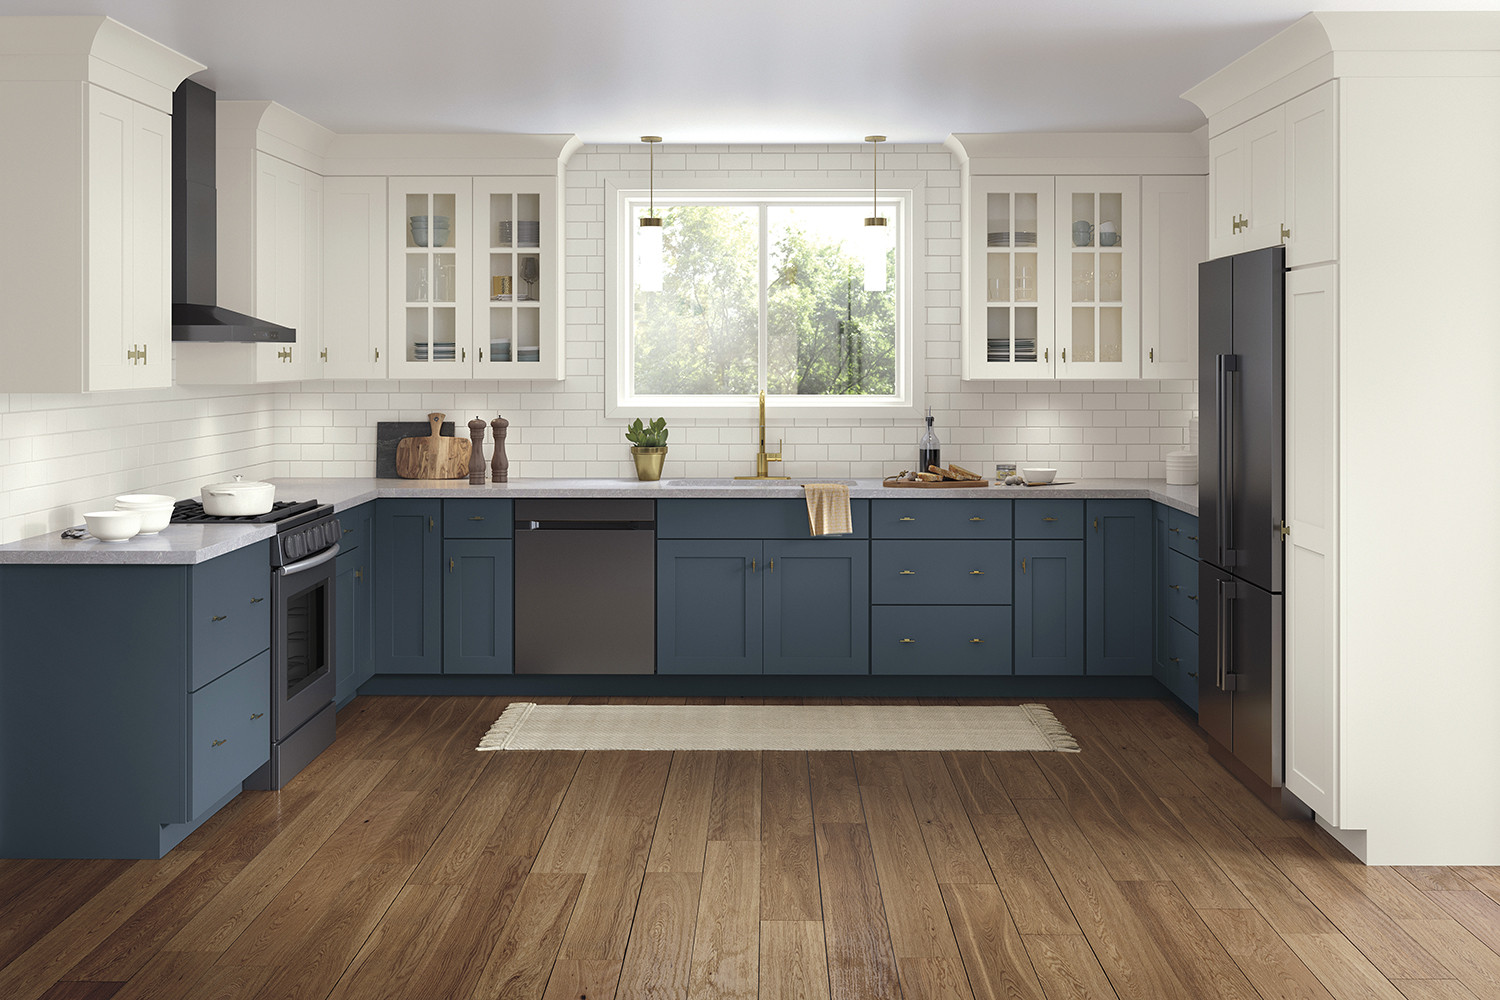 Kitchen Cabinets Colors 2020
 Color Trends for 2020 to Make Kitchens Bathrooms Pop